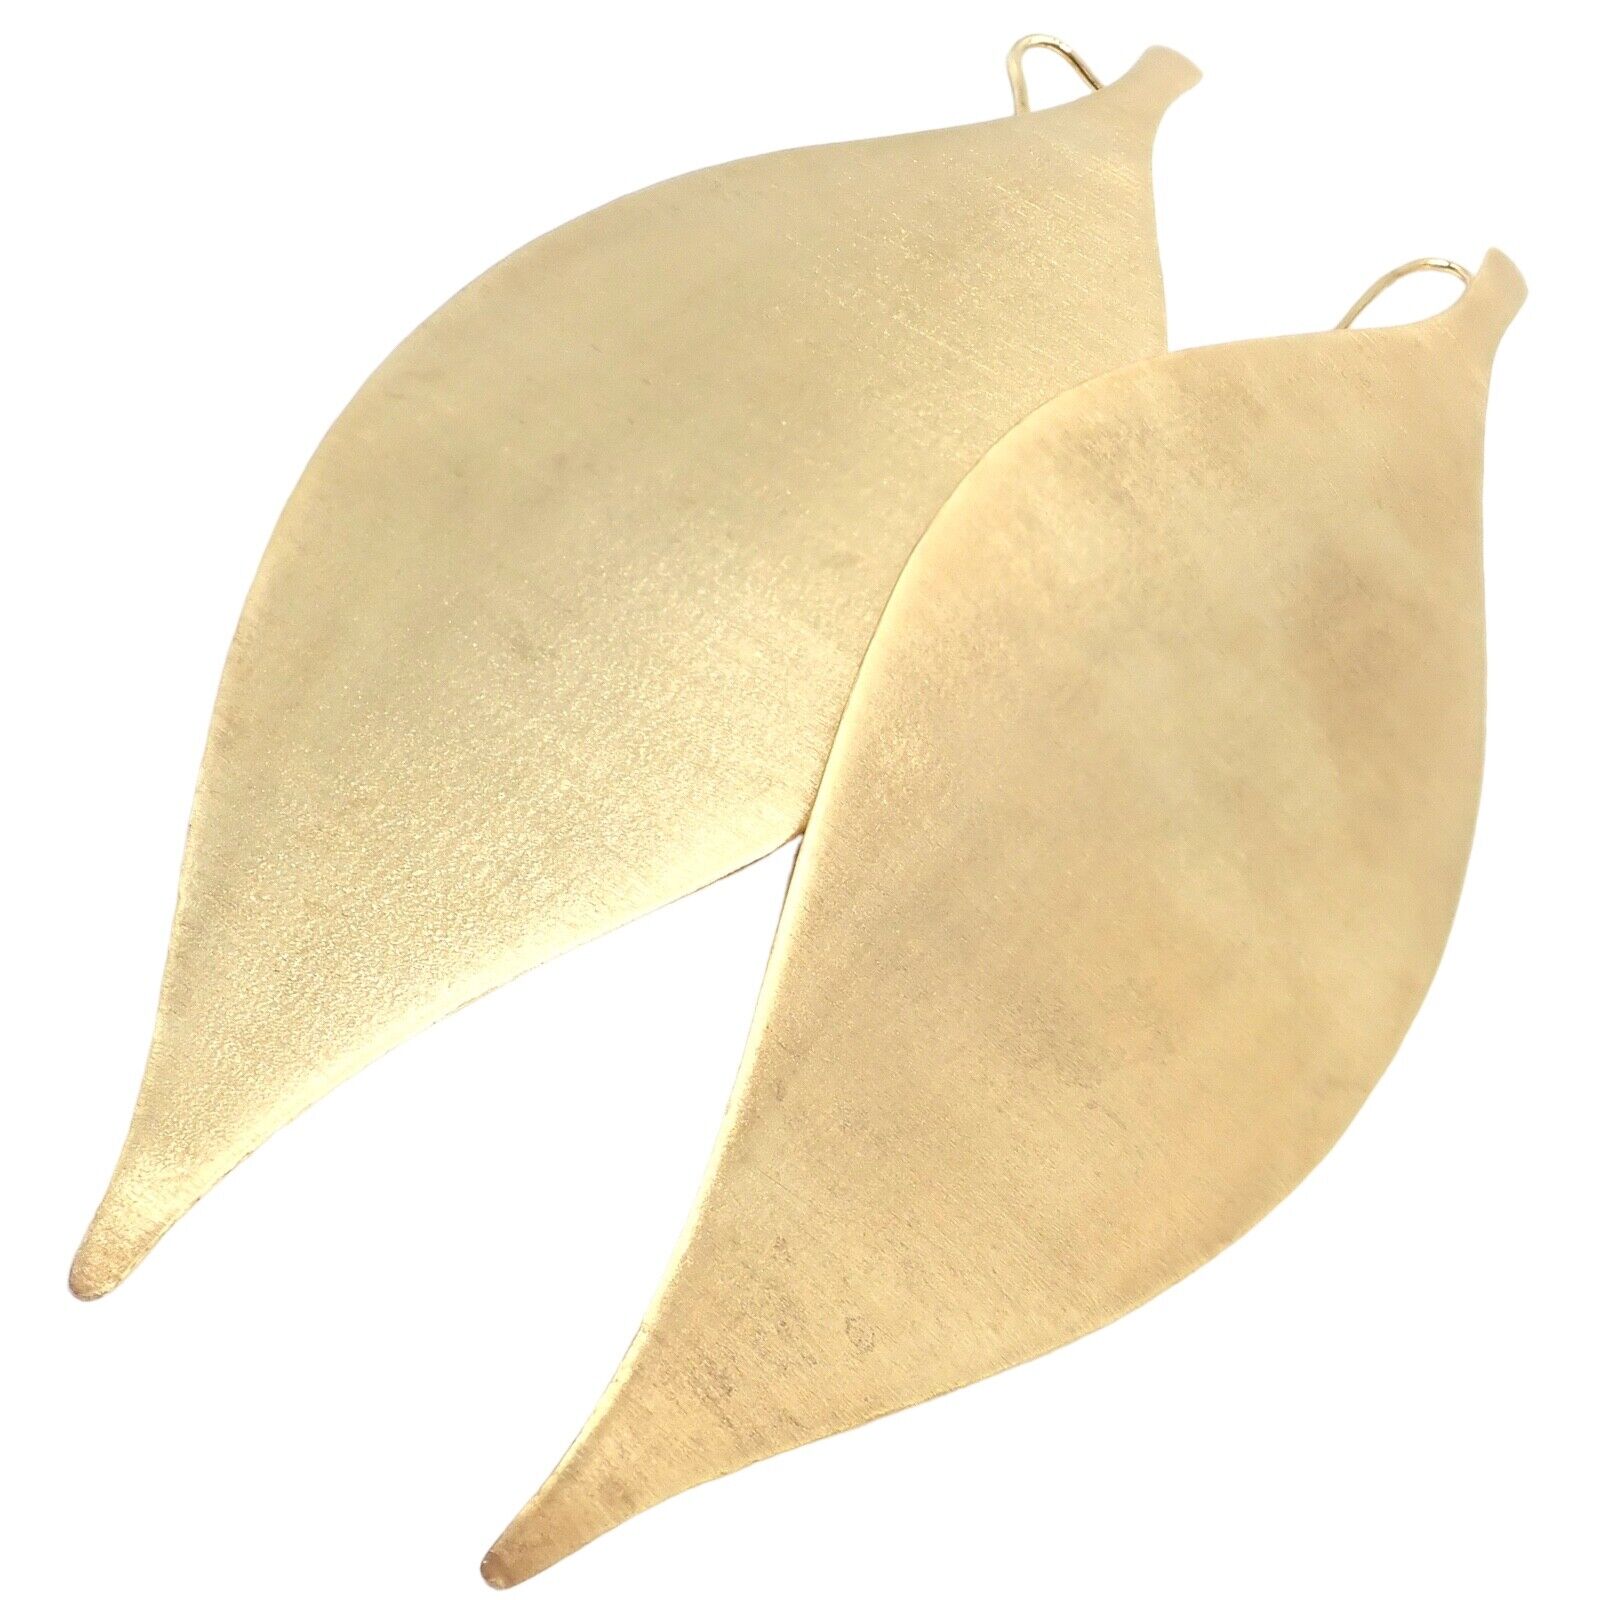 H. Stern Jewelry & Watches:Fine Jewelry:Earrings Rare Authentic H. Stern 18k Yellow Gold Large Giant Leaf Dangle Earrings